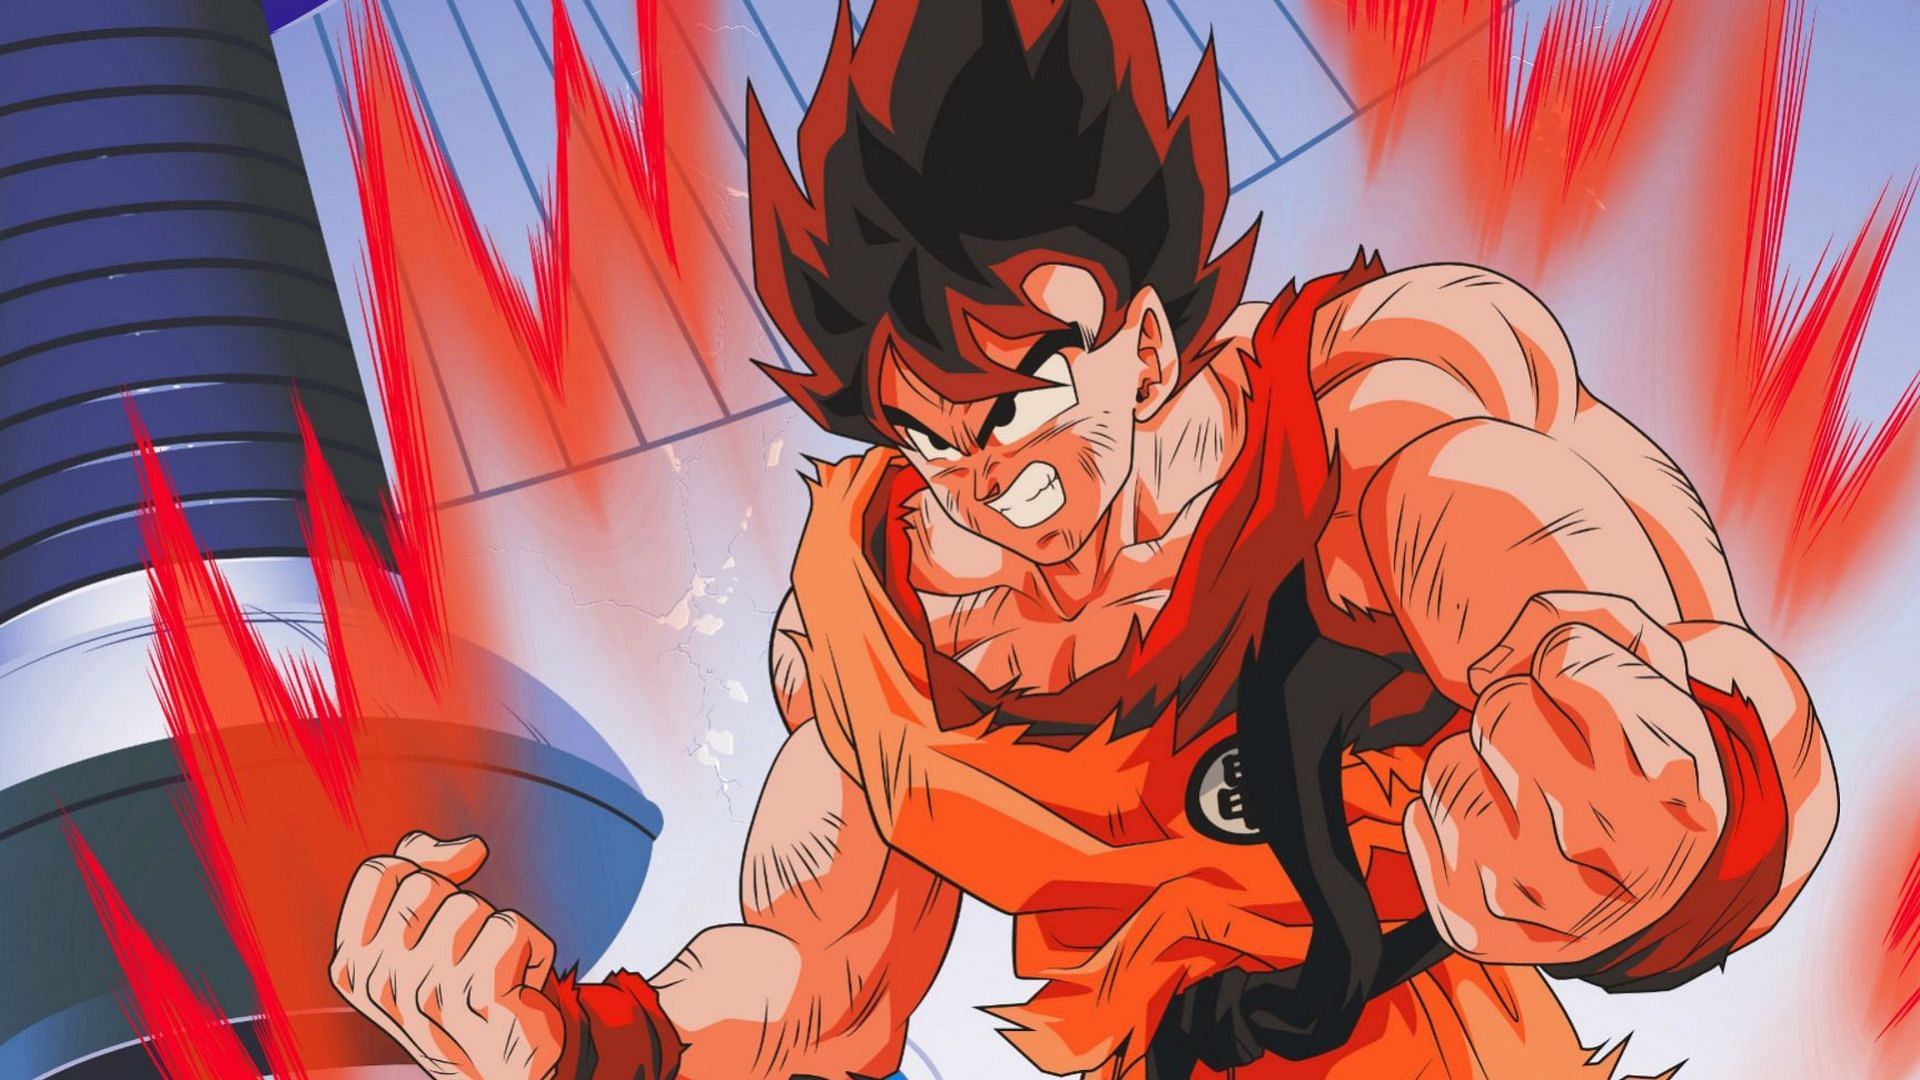 Goku as shown in the series (Image via Toei Animation)